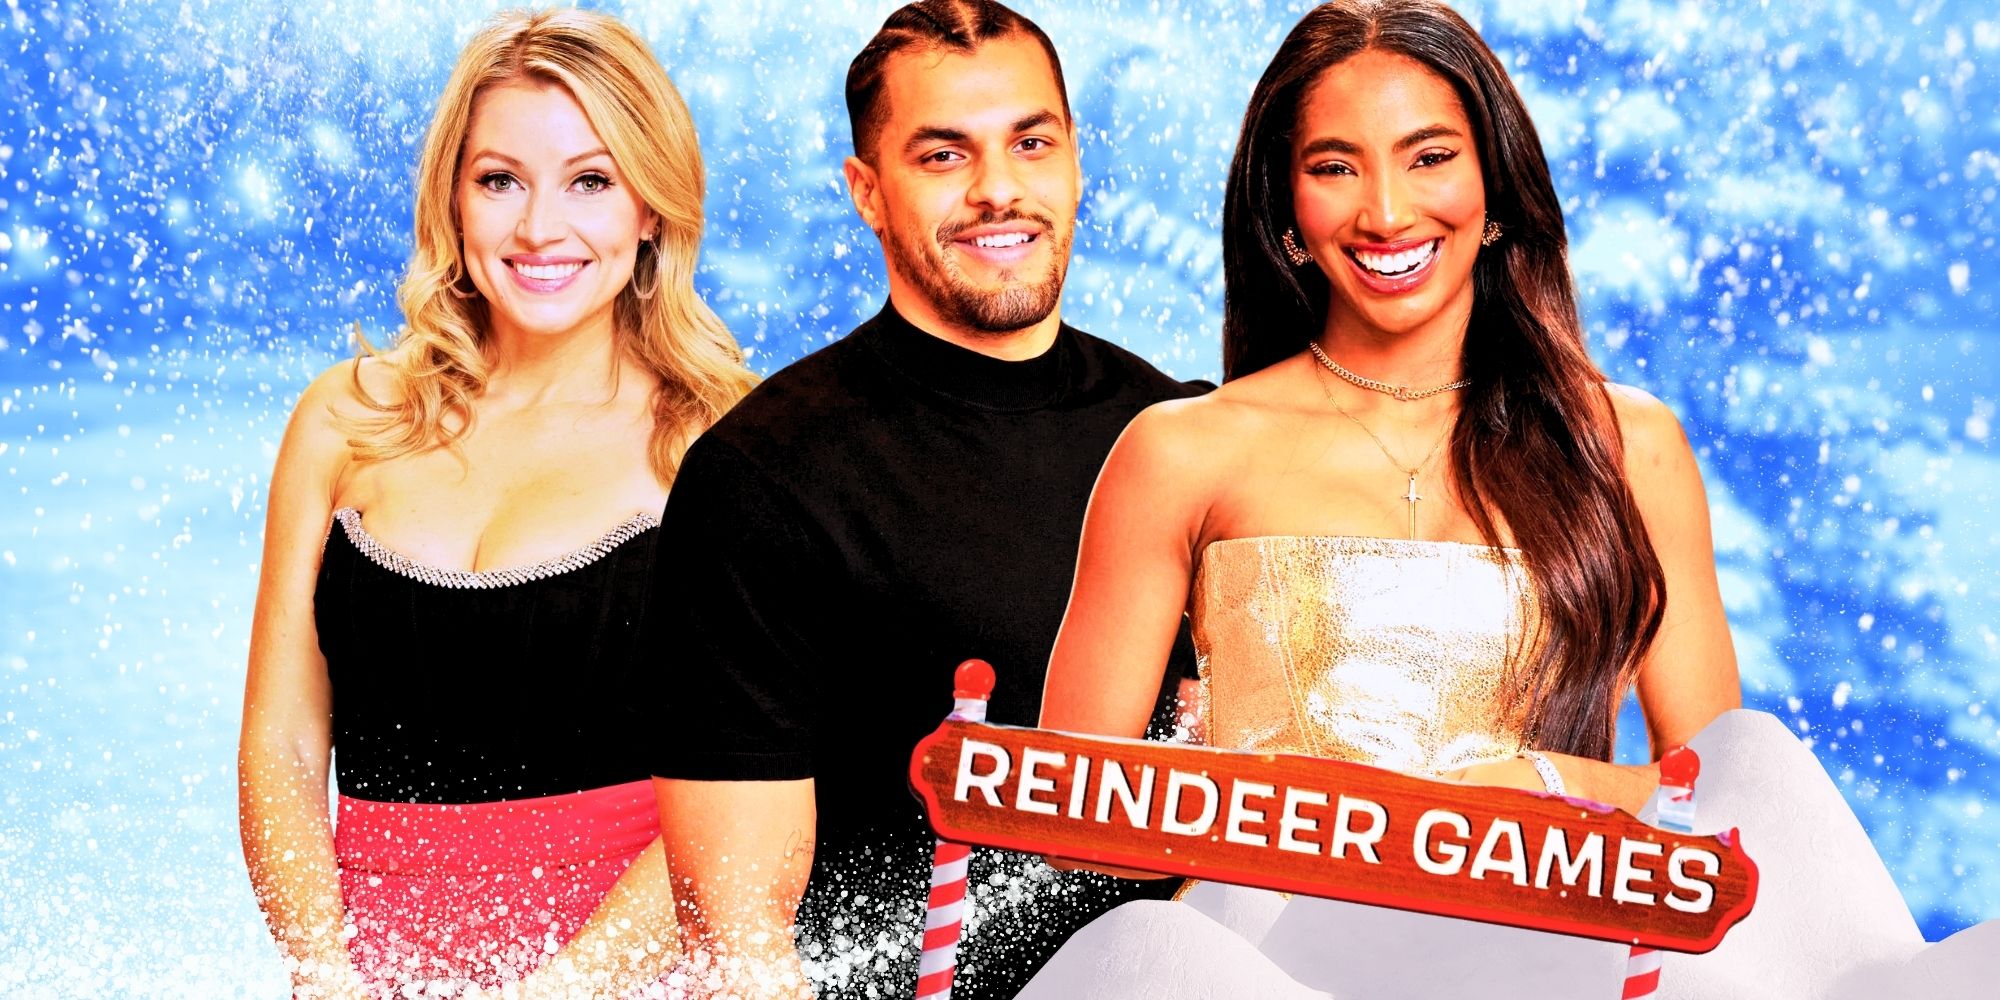 Taylor Hale Claims Big Brother Reindeer Games Misled Viewers During